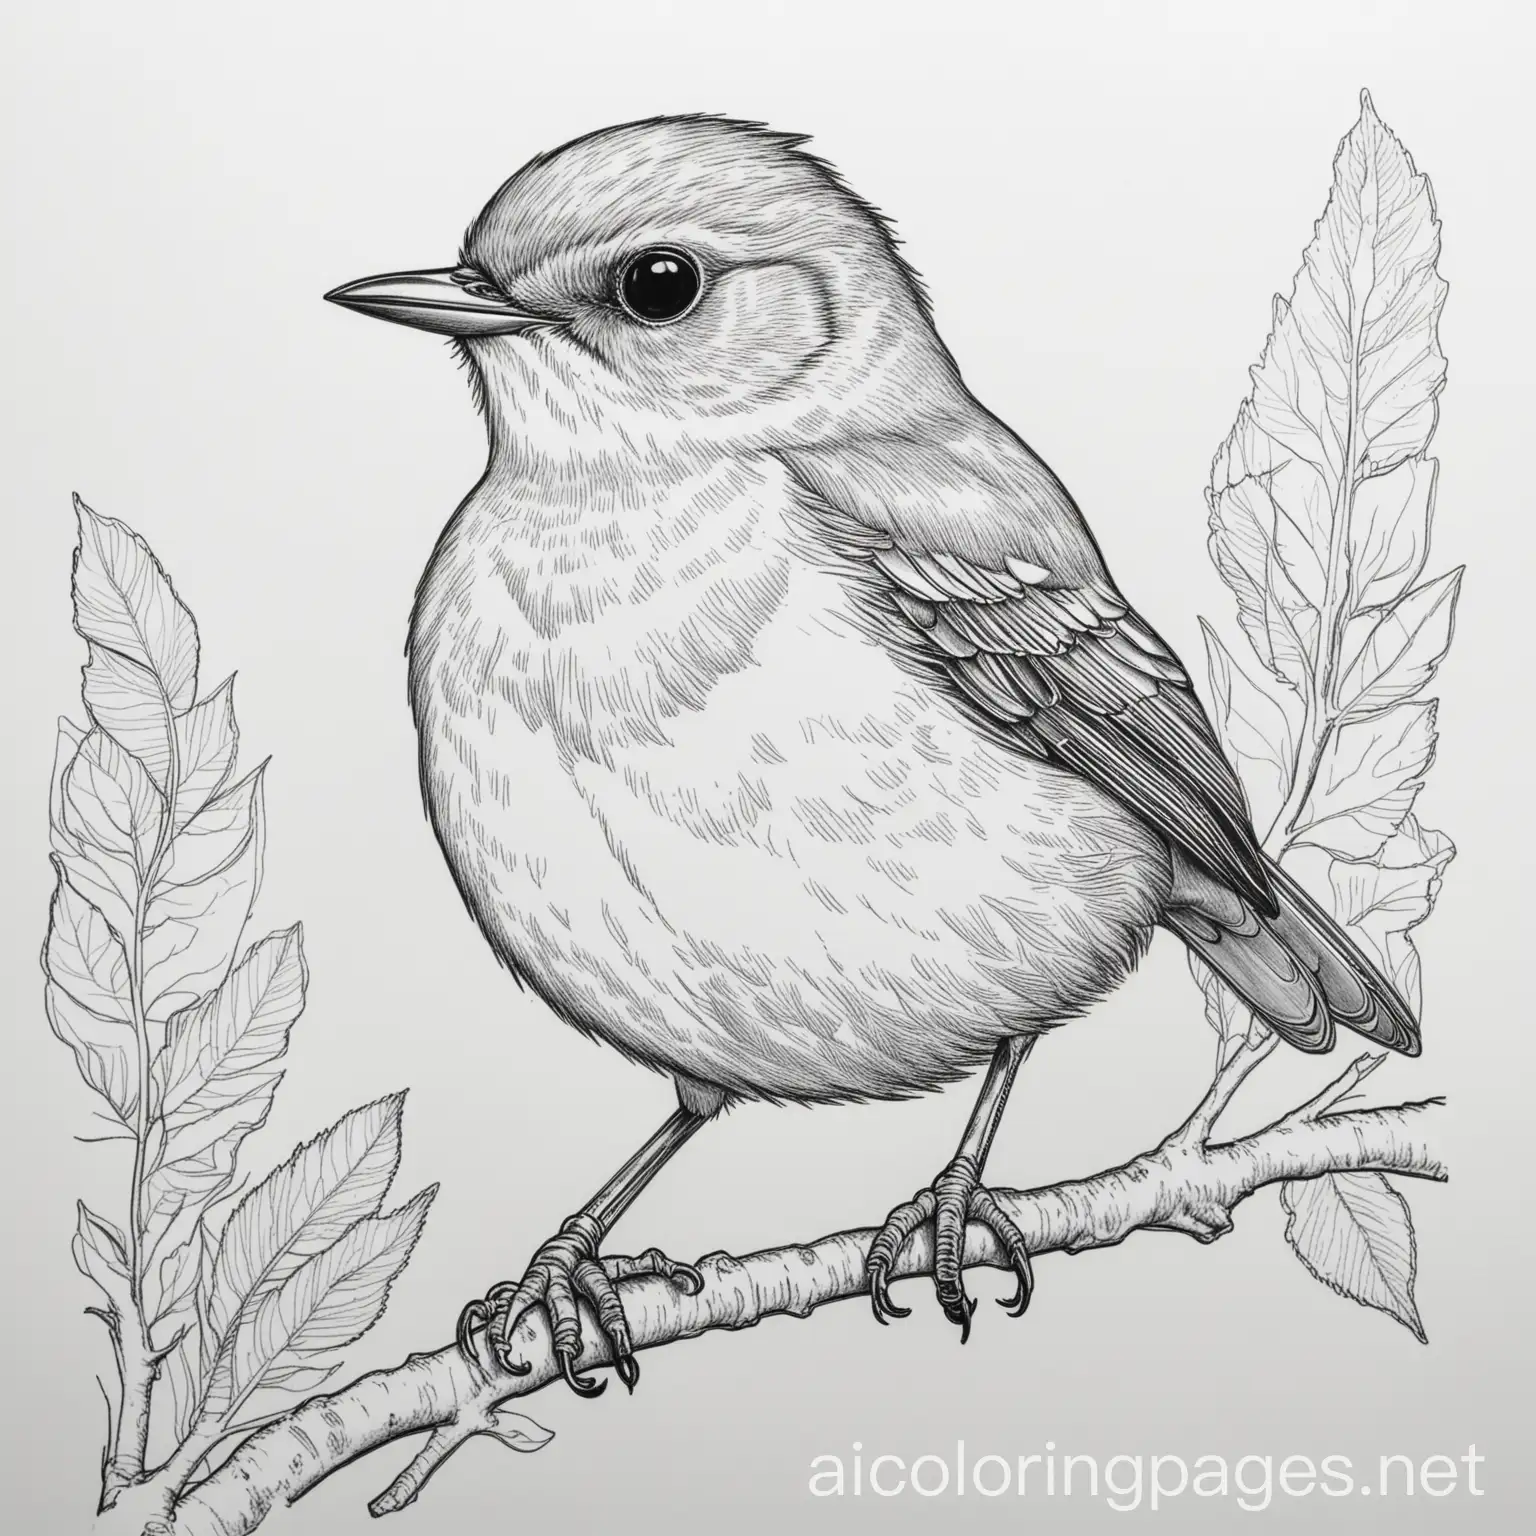 red robin, Coloring Page, black and white, line art, white background, Simplicity, Ample White Space. The background of the coloring page is plain white to make it easy for young children to color within the lines. The outlines of all the subjects are easy to distinguish, making it simple for kids to color without too much difficulty